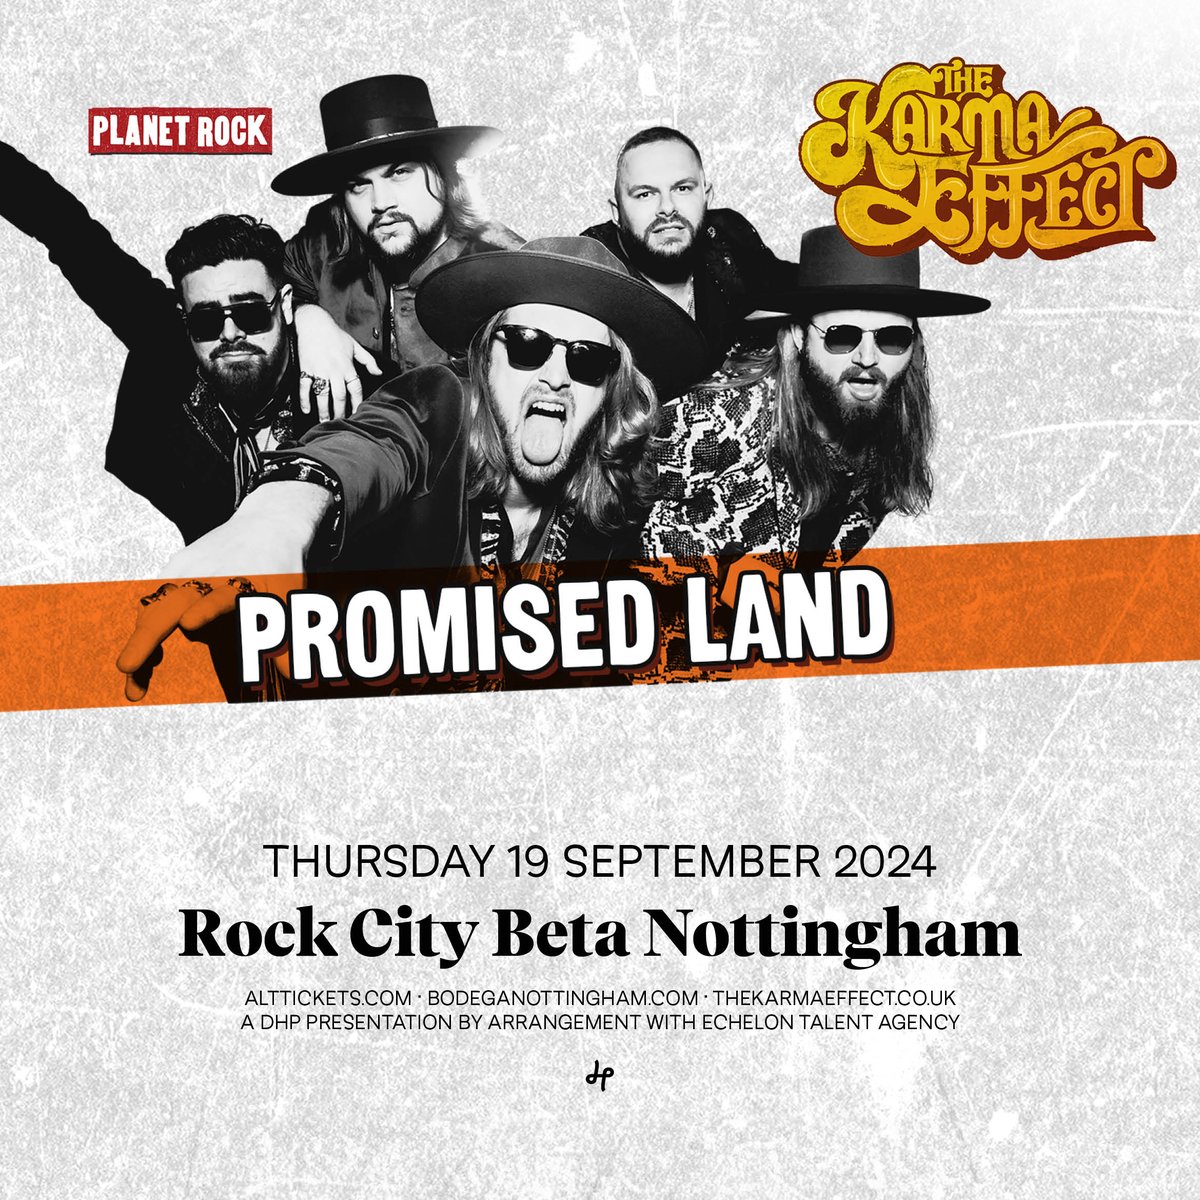 Classic rock n roll band @KarmaEffectUK head to Nottingham on their 'Promised Land' UK tour, see them live at @Rock_City_Notts' Beta on 19th September! Tickets go on sale this Friday at 10am, set a reminder: tinyurl.com/2tbjudh5